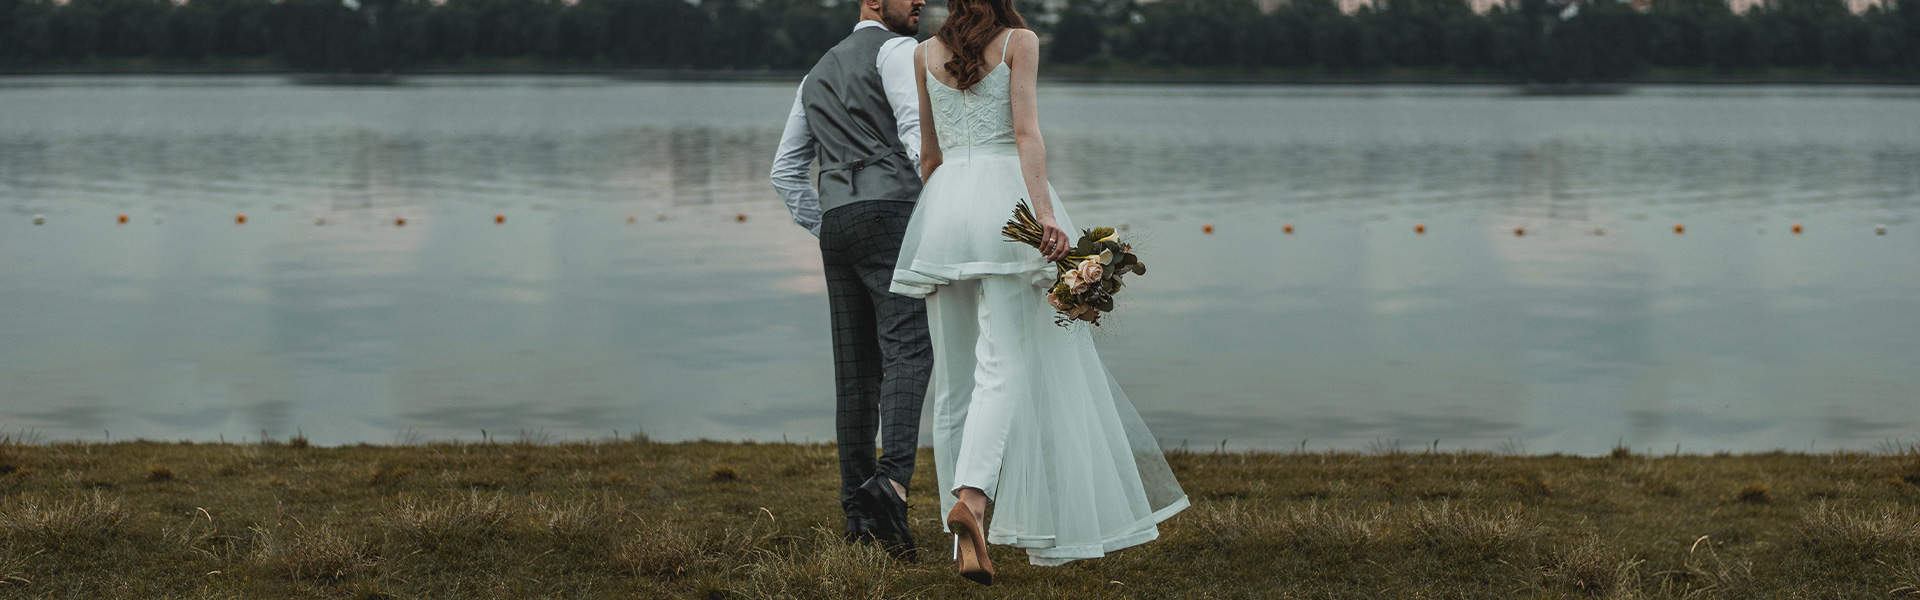 New bride and groom walk out to the lake shore to share a tender moment